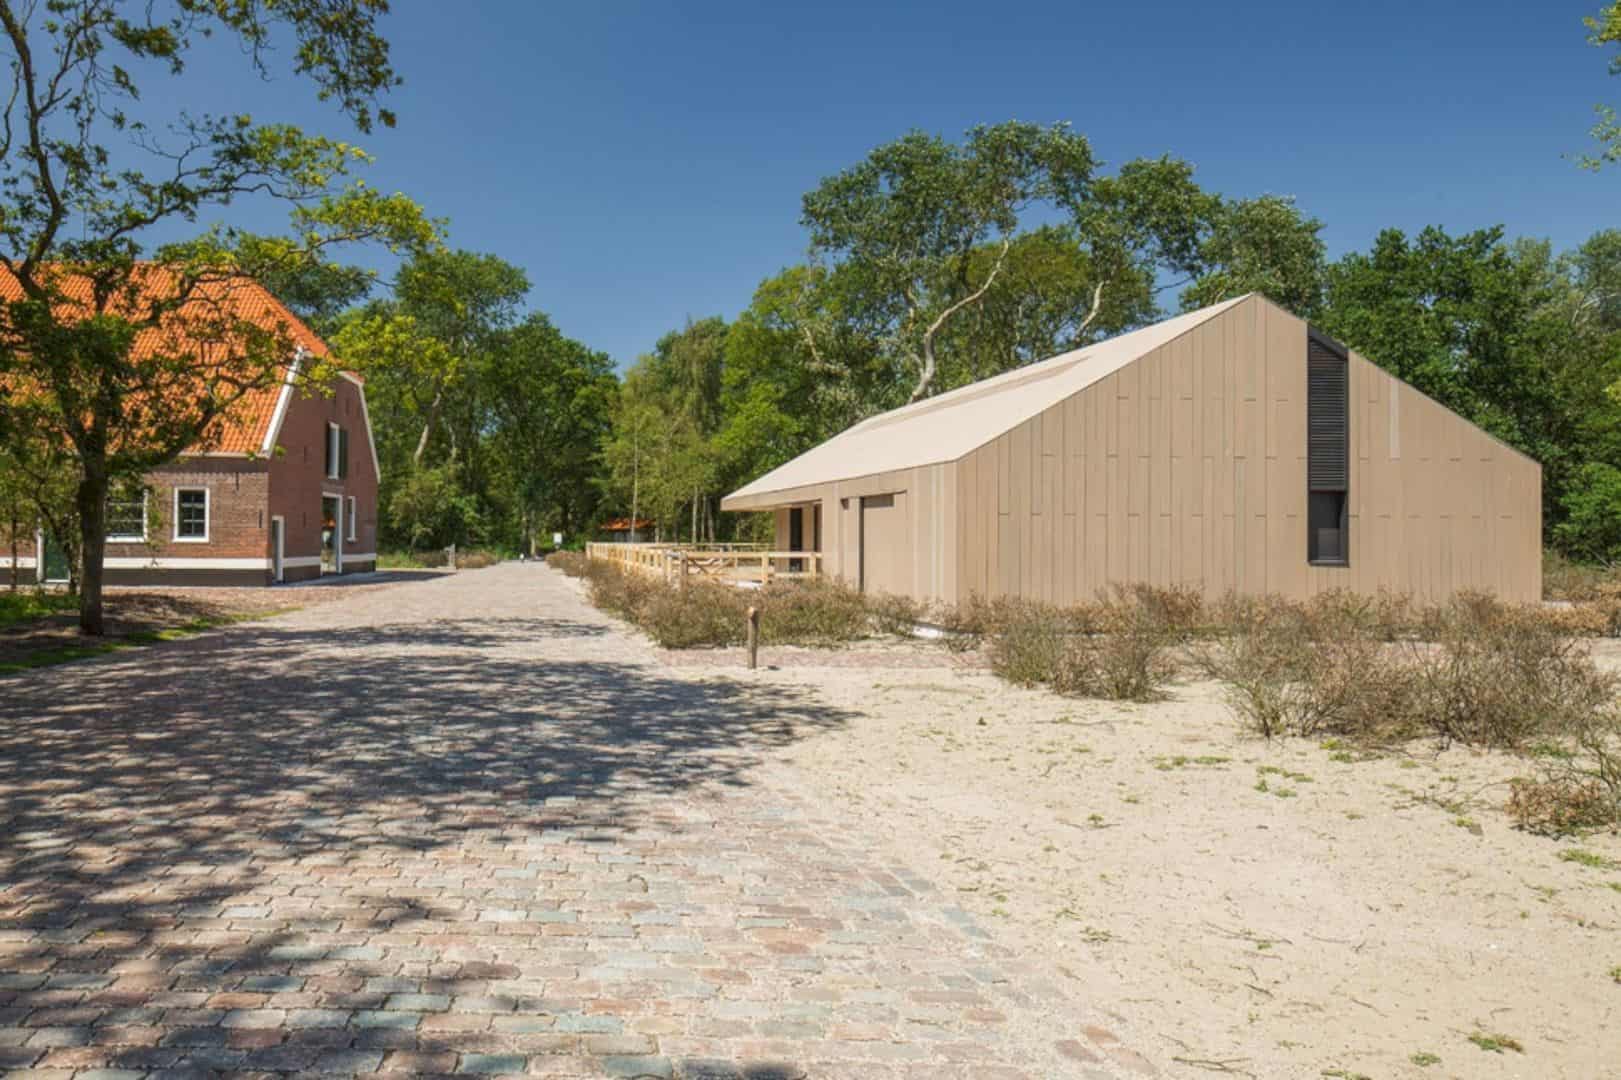 Meijendel Visitors Center & Stables Designing A New Stable In Style 17